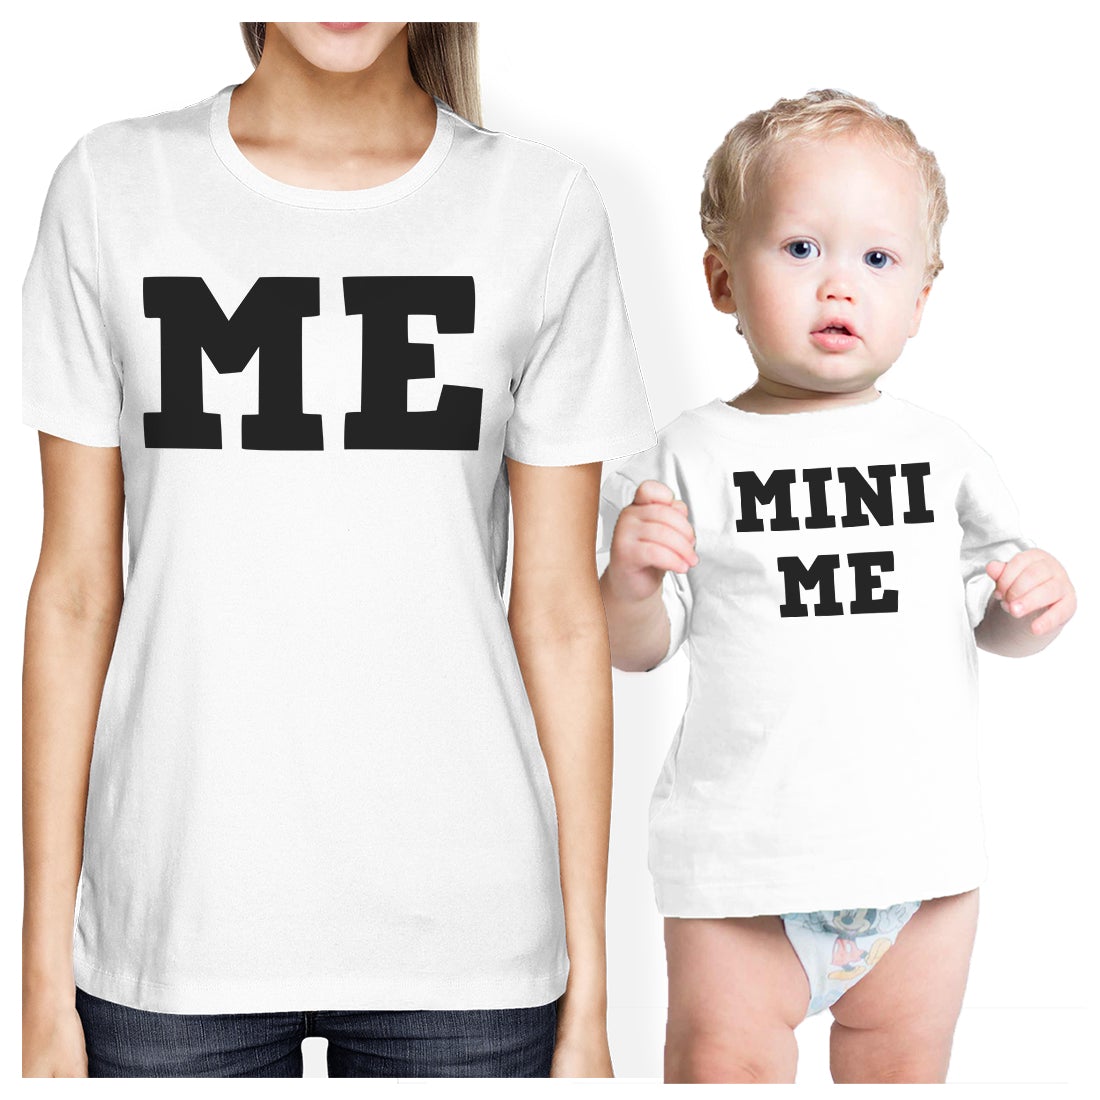 Mini Me Mom and Baby Matching Gift Shirts For New Mom X-Mas White